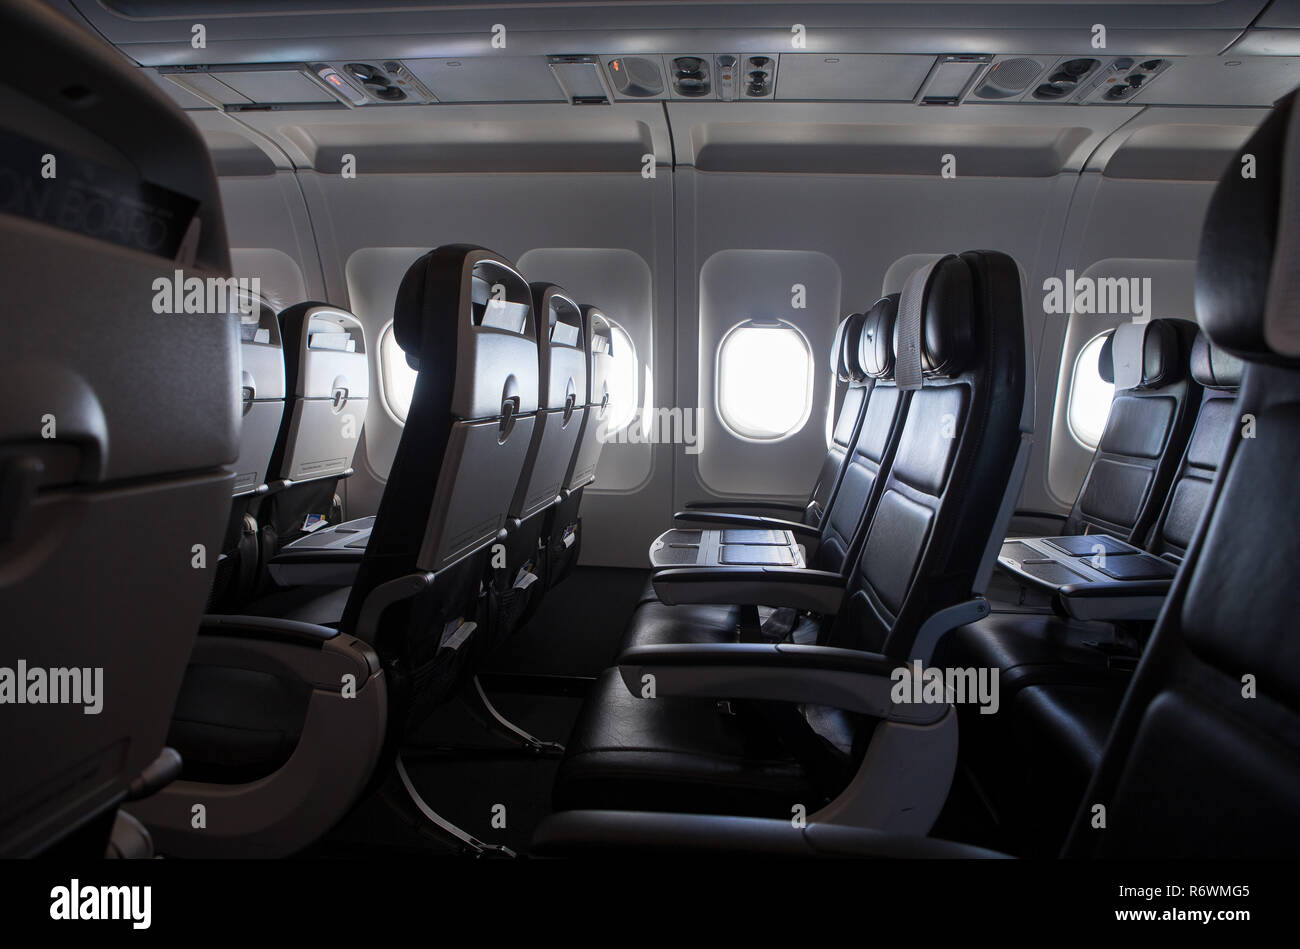 The Business Class Cabin And Seats On A British Airways Airbus A320